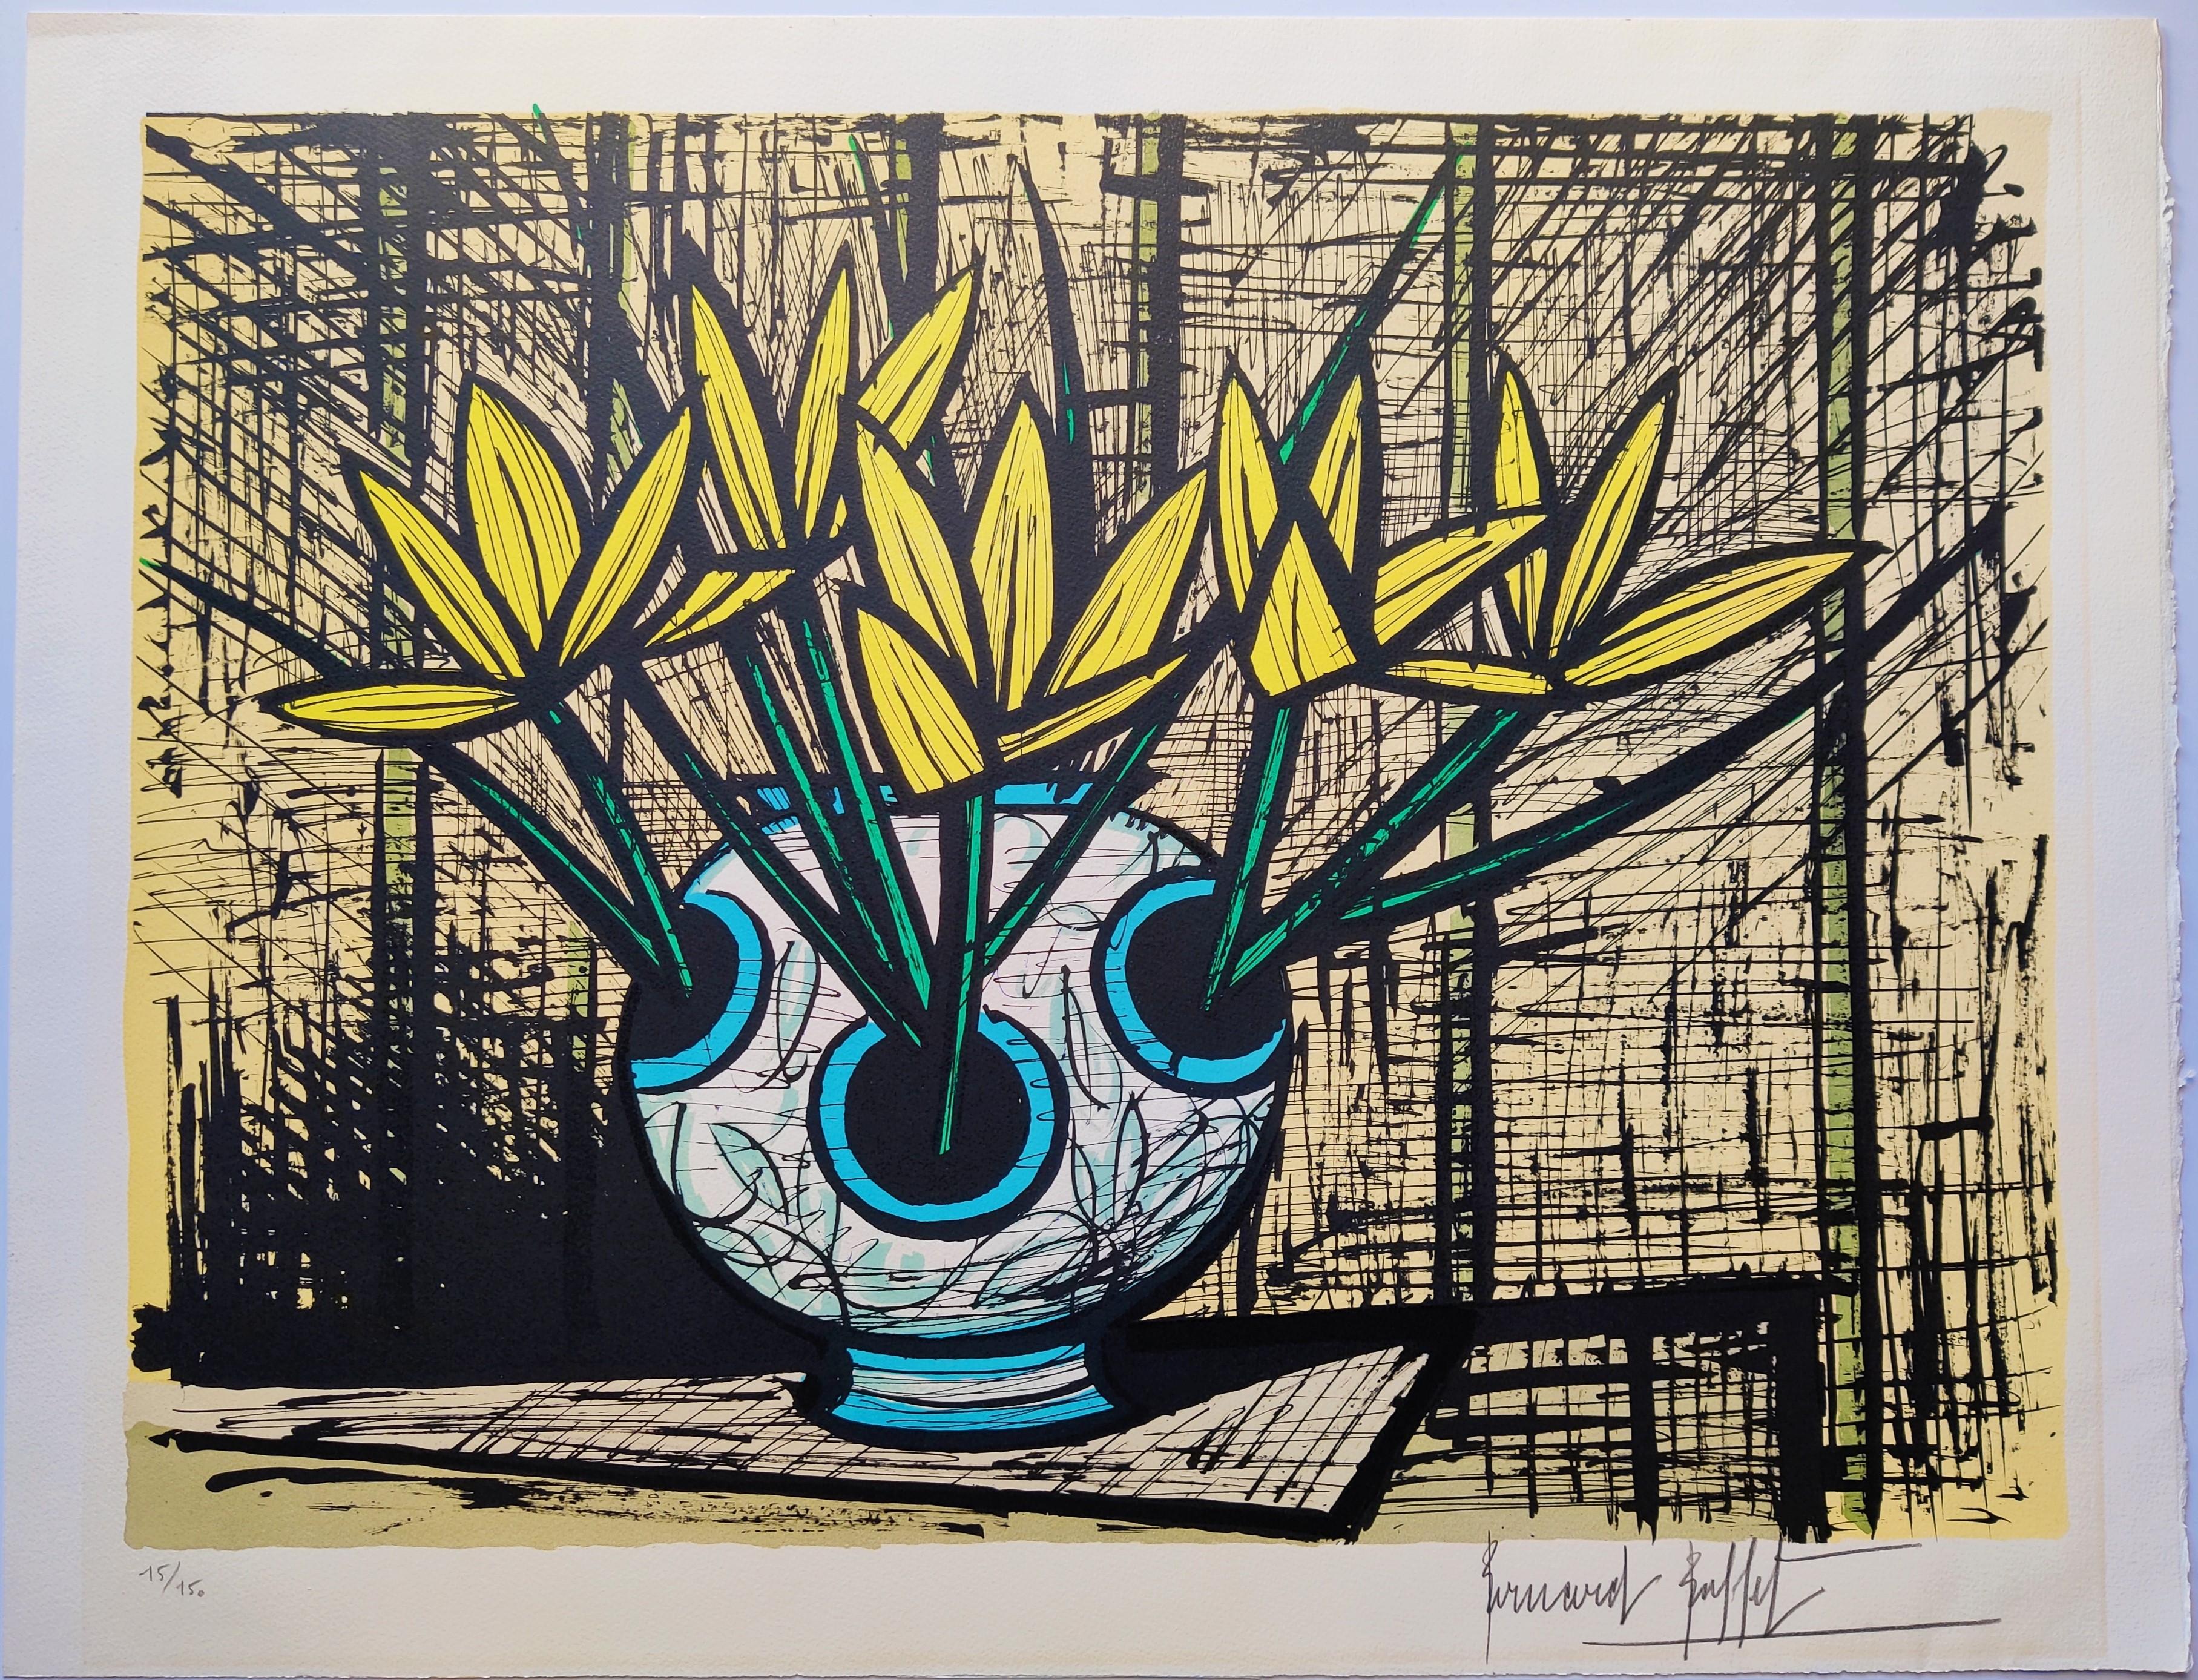 Bernard Buffet
Crocus jaunes, 1987
Lithograph
Hand signed low right 
Numbered 15/150
Image 67 x 50 cm
Sheet 75 x 58
Framing is an option, will be framed with an aluminium frame, an acid-free mat, an acid-free back and an UV-protected acrylic glass  